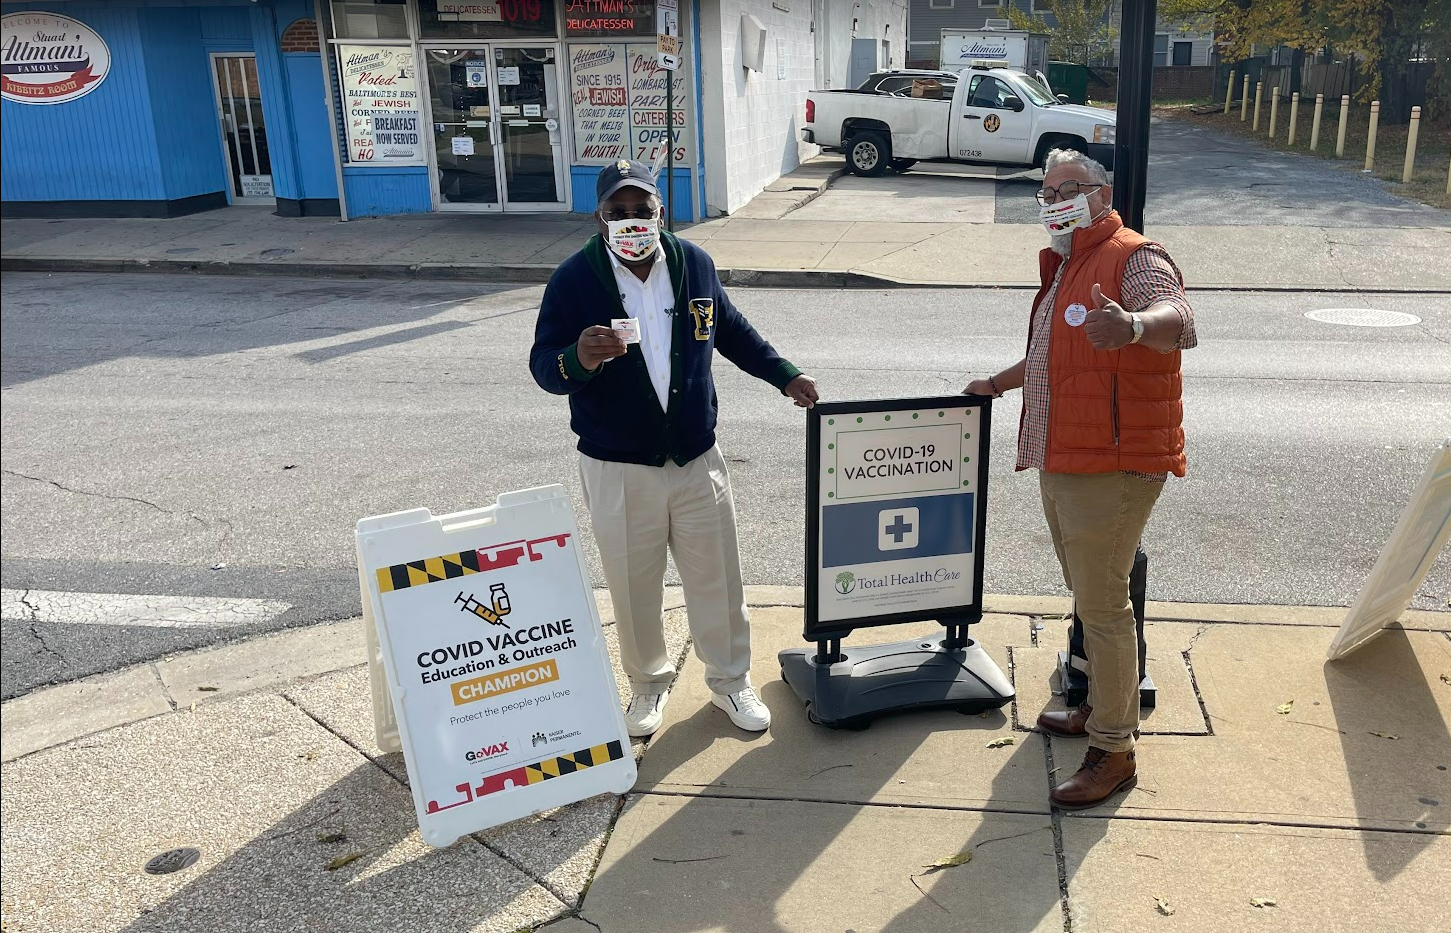 Two Black men pose next to a "free vaccination" sign and give a thumbs up